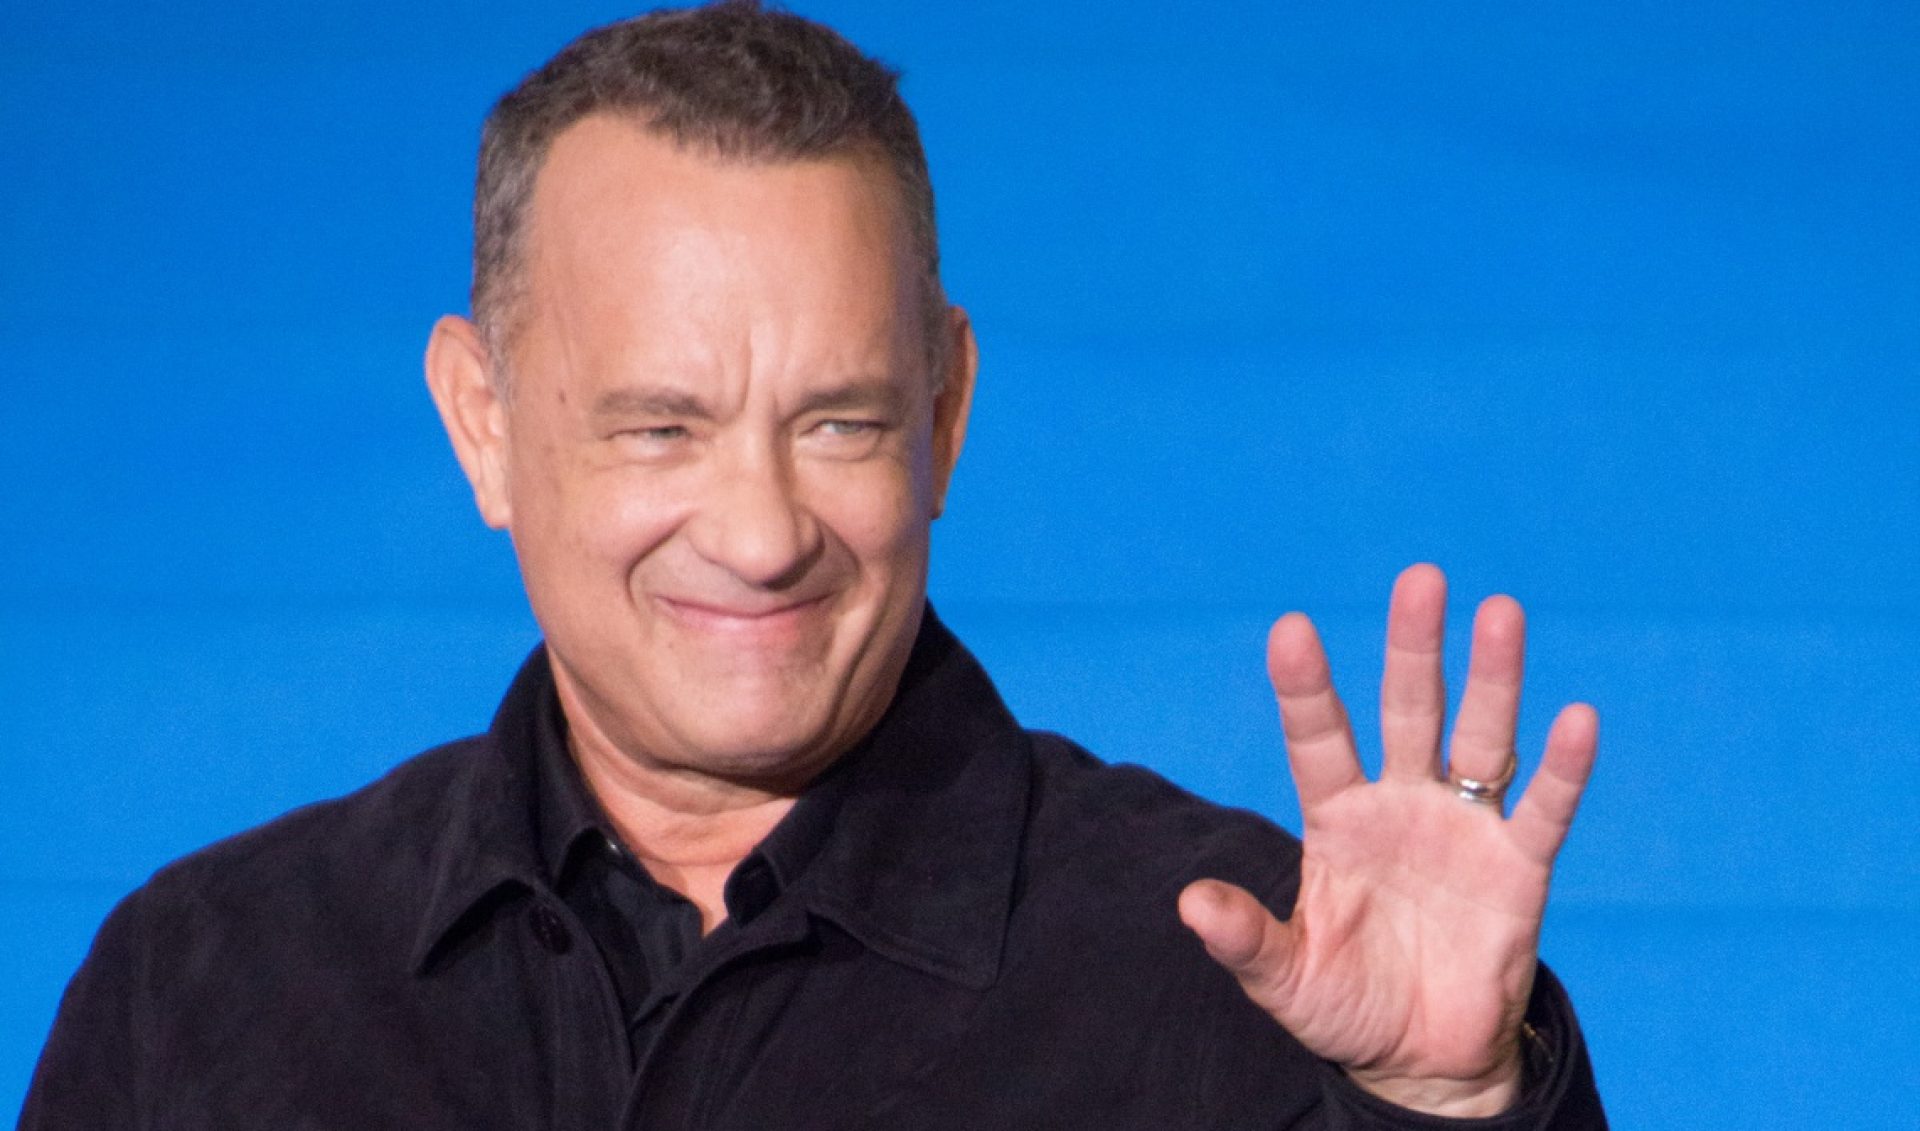 YouTube In Hot Water Again After Search Results For Tom Hanks Lead To Conspiracy Theories